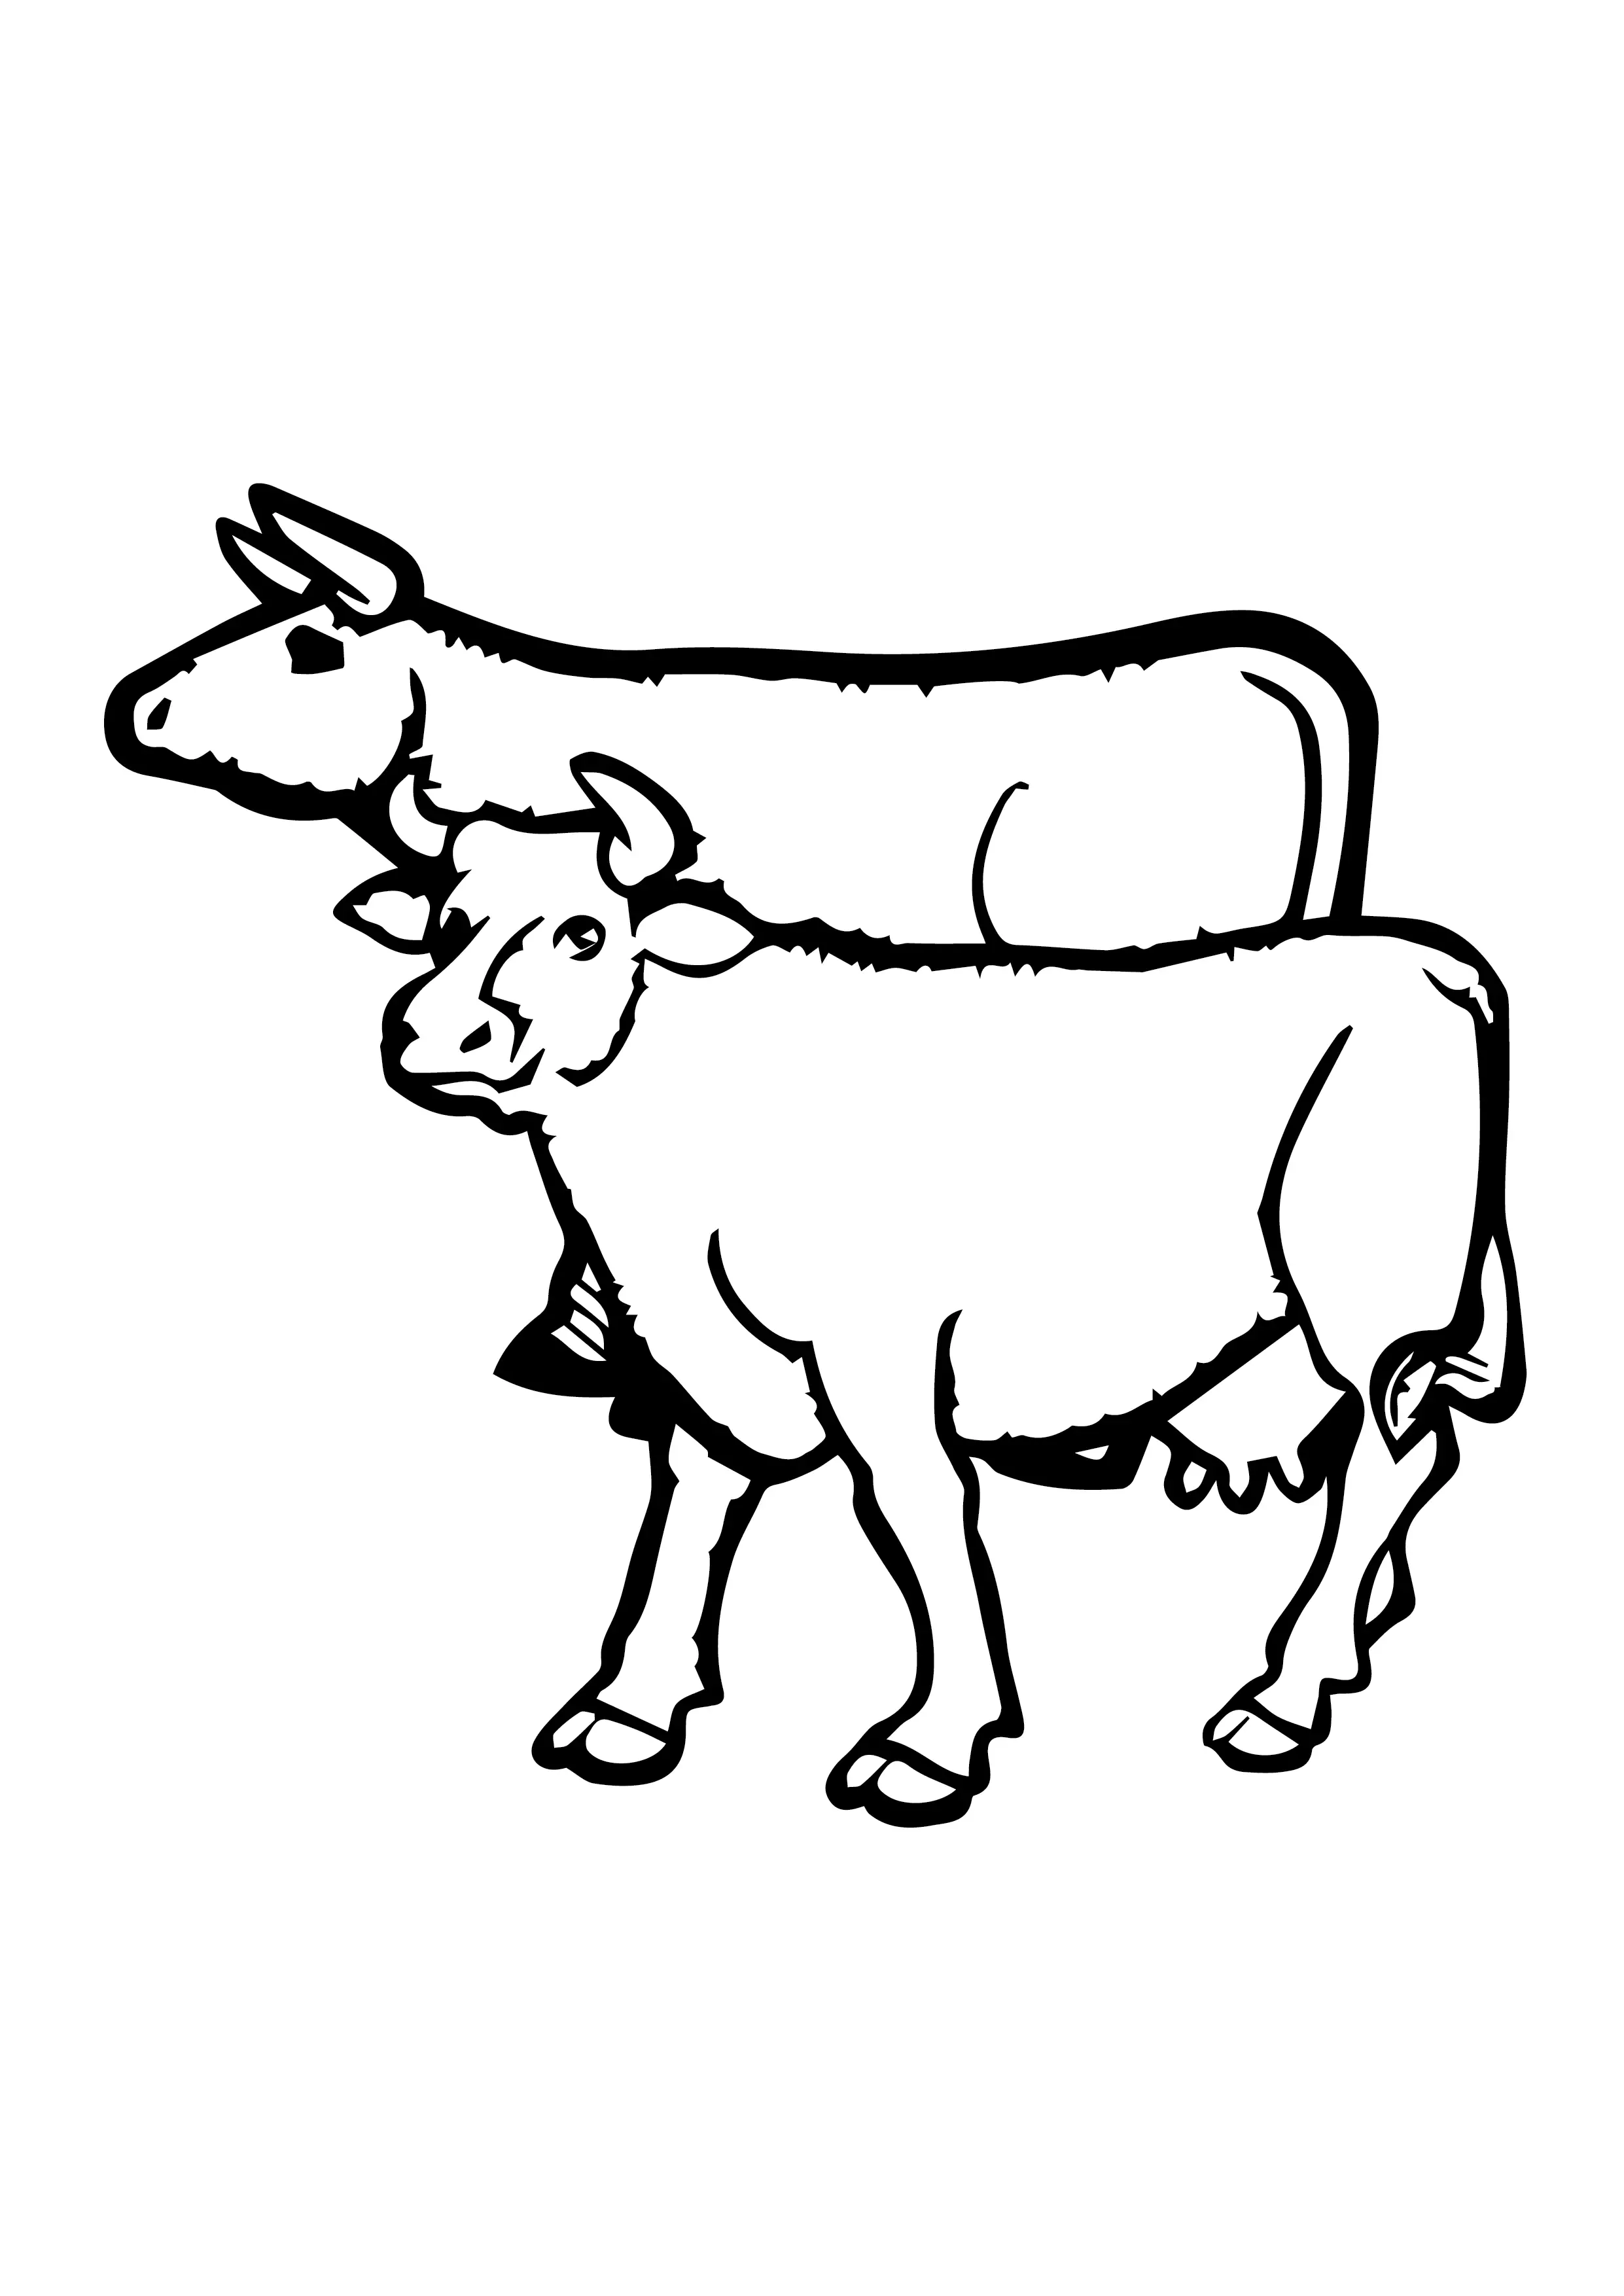 Two Cows Bull Bovine-Cartoon-Free-Clipart-Line-Drawing-coloring-page-Activity-For-Kids-02